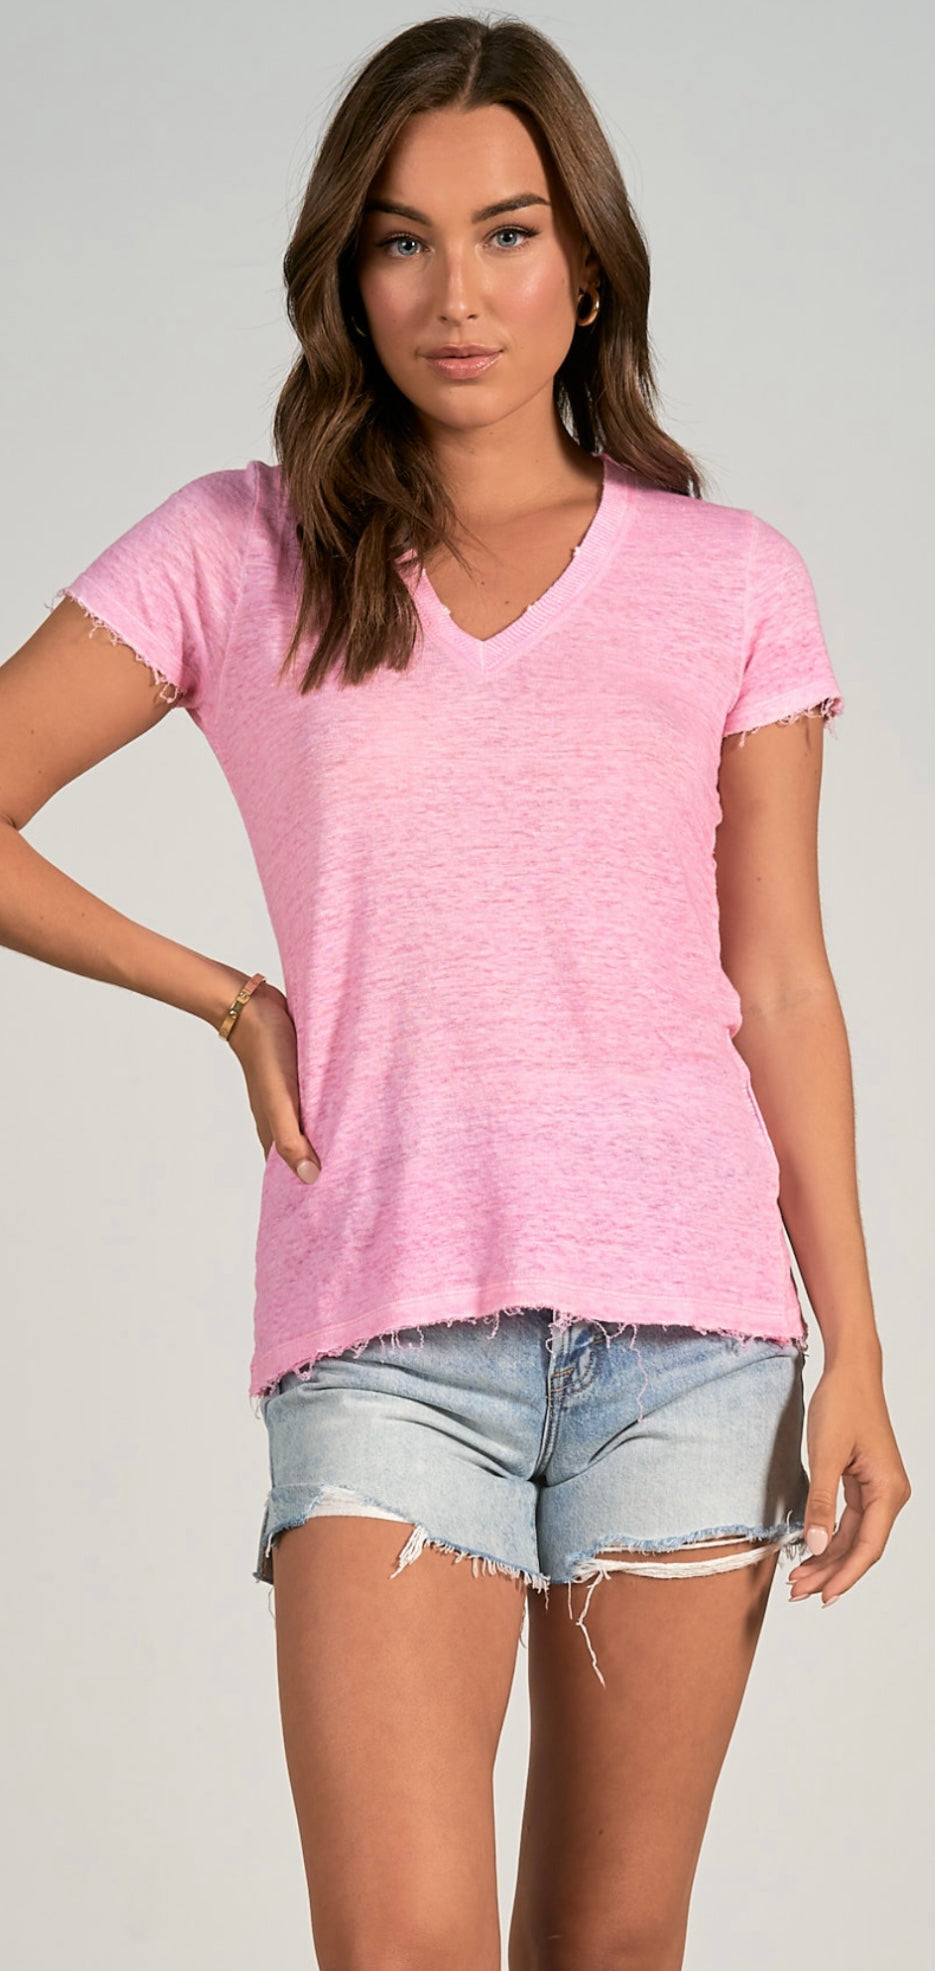 Lightweight burnout tee with small rips and fraying (2 colors)